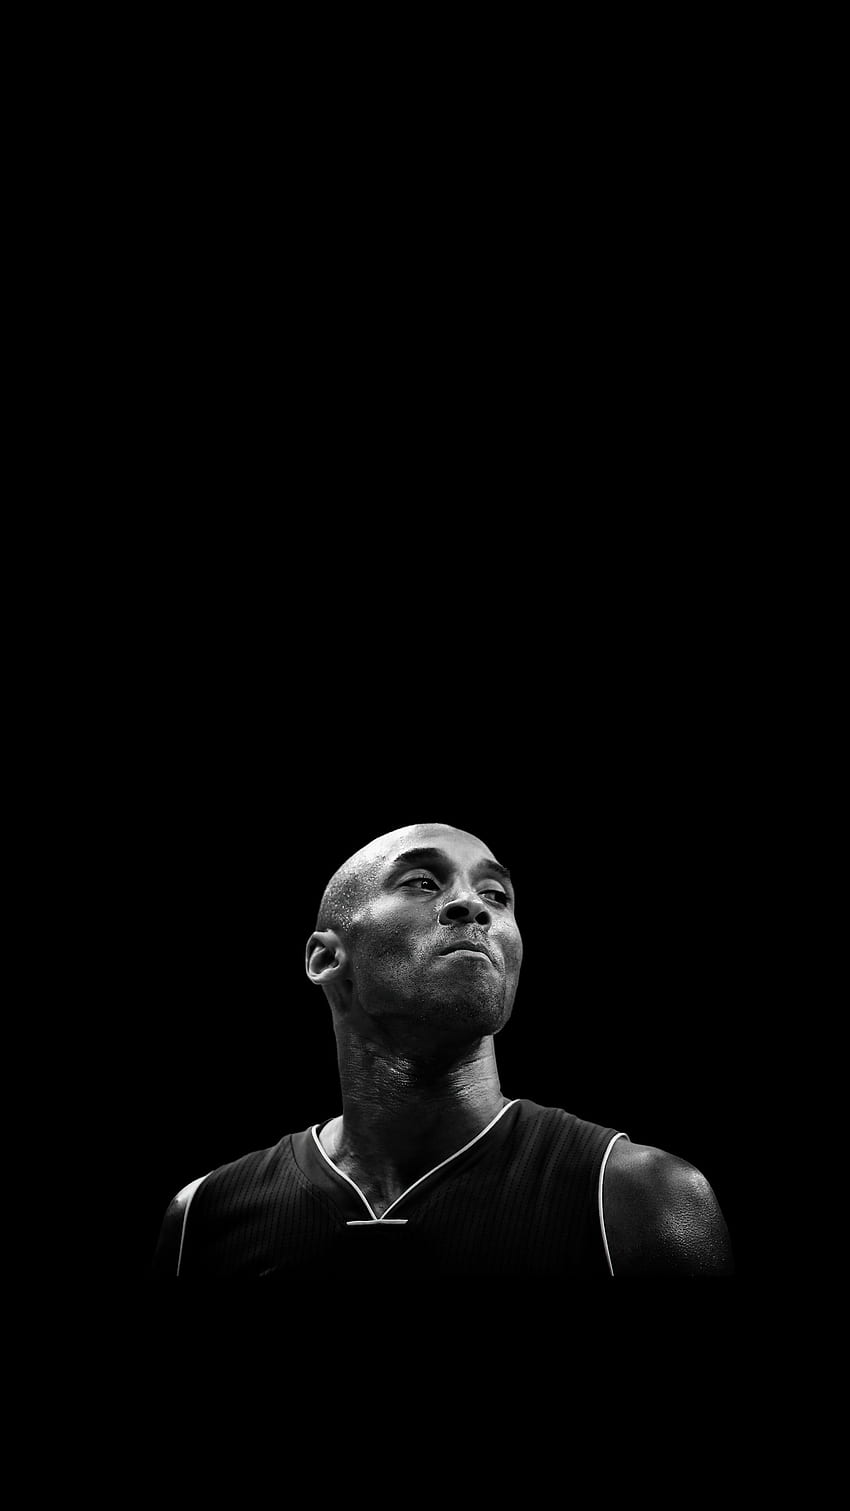 Other Laker Kobe Fans Might Enjoy This As Well. Rip, Mamba Mentality HD phone wallpaper